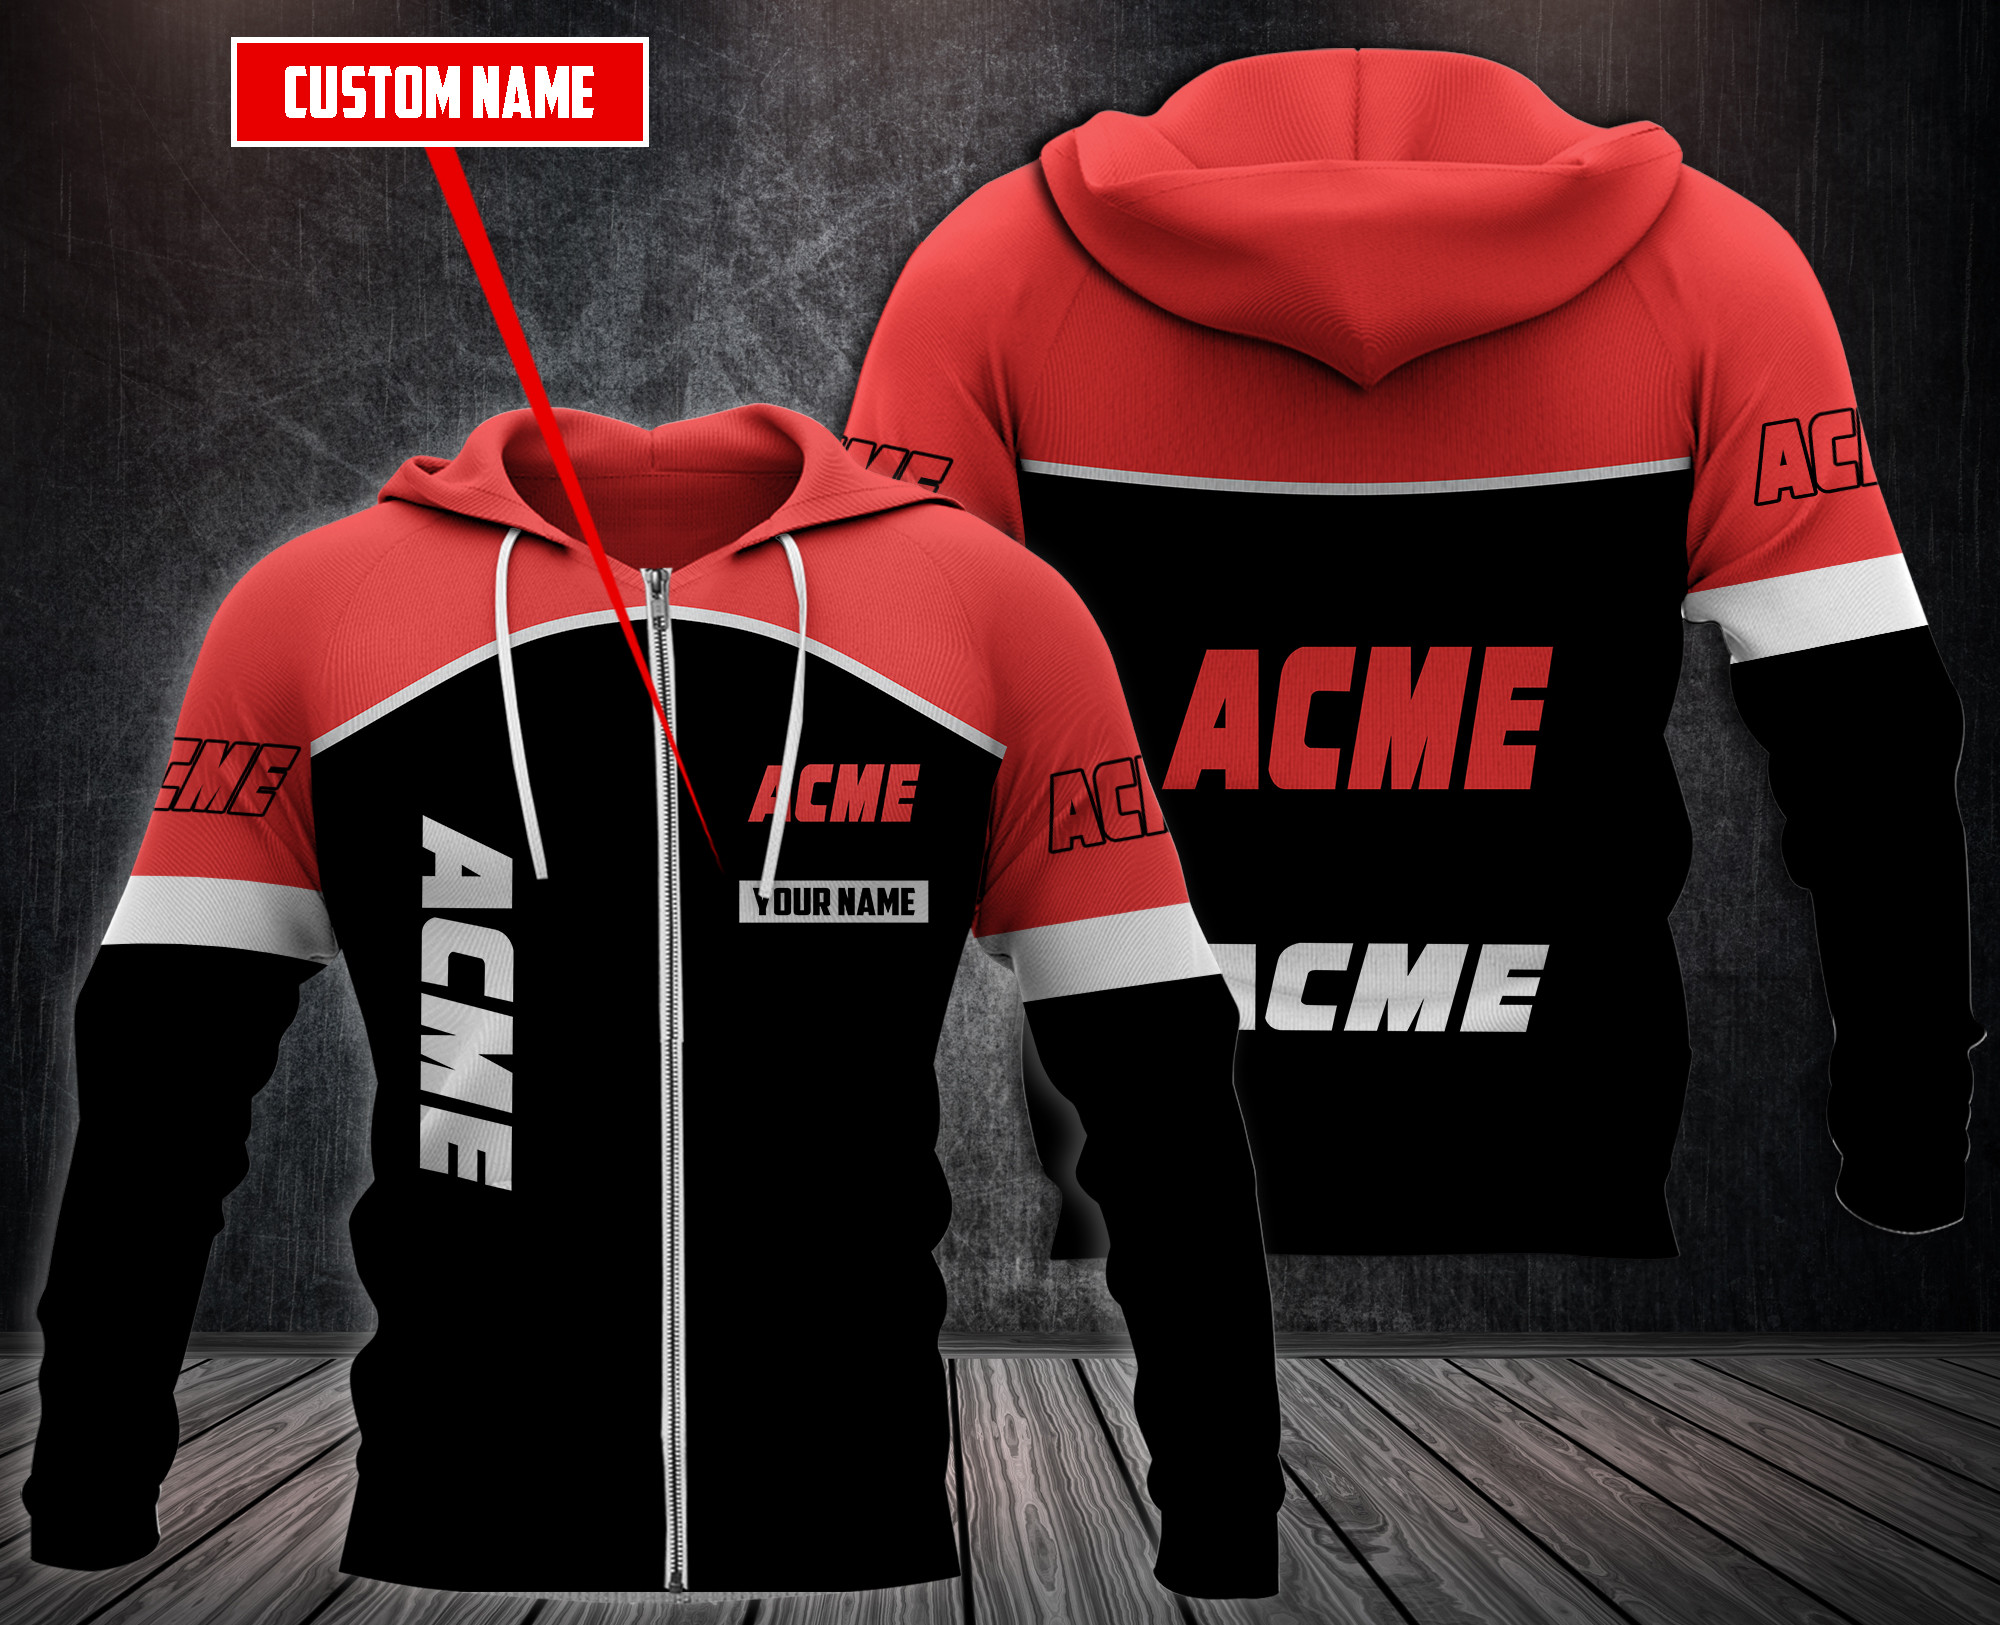 Choose the right hoodies for you on our boxboxshirt and ethershirt websites in 2022 25